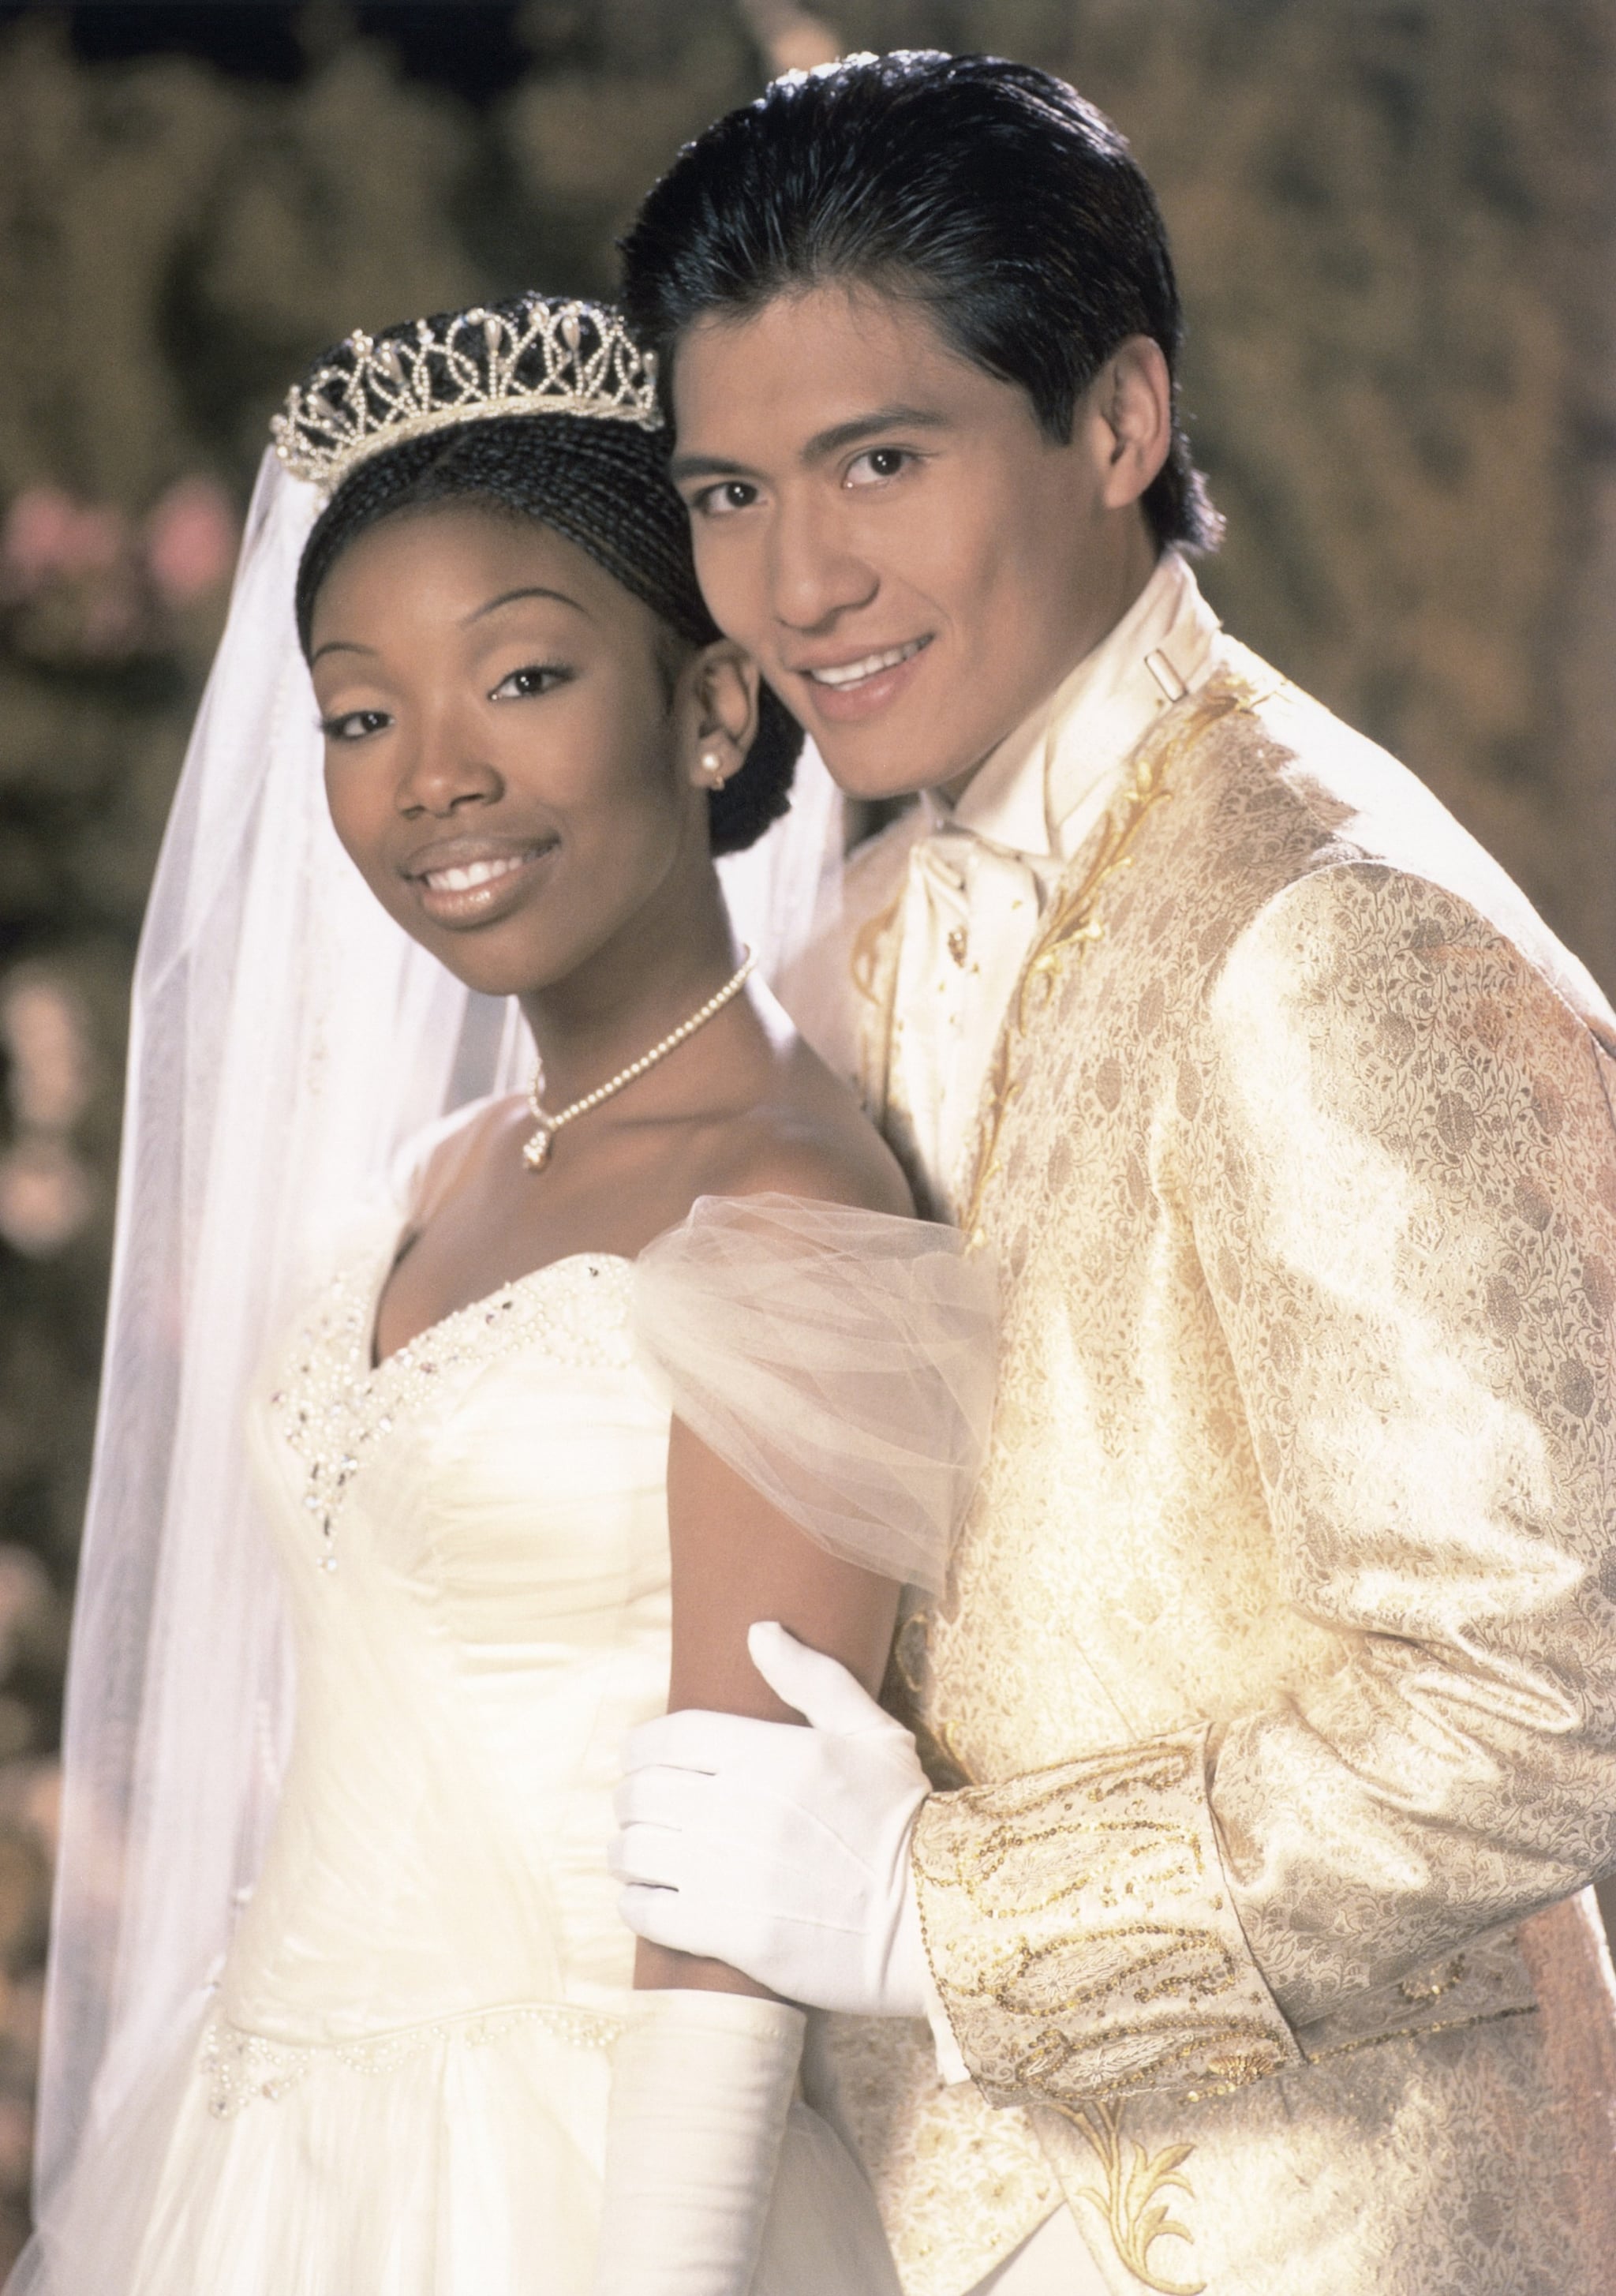 CINDERELLA, from left: Brandy Norwood, Paolo Montalban, 1997. photo: Neal Preston/ ABC /Courtesy Everett Collection